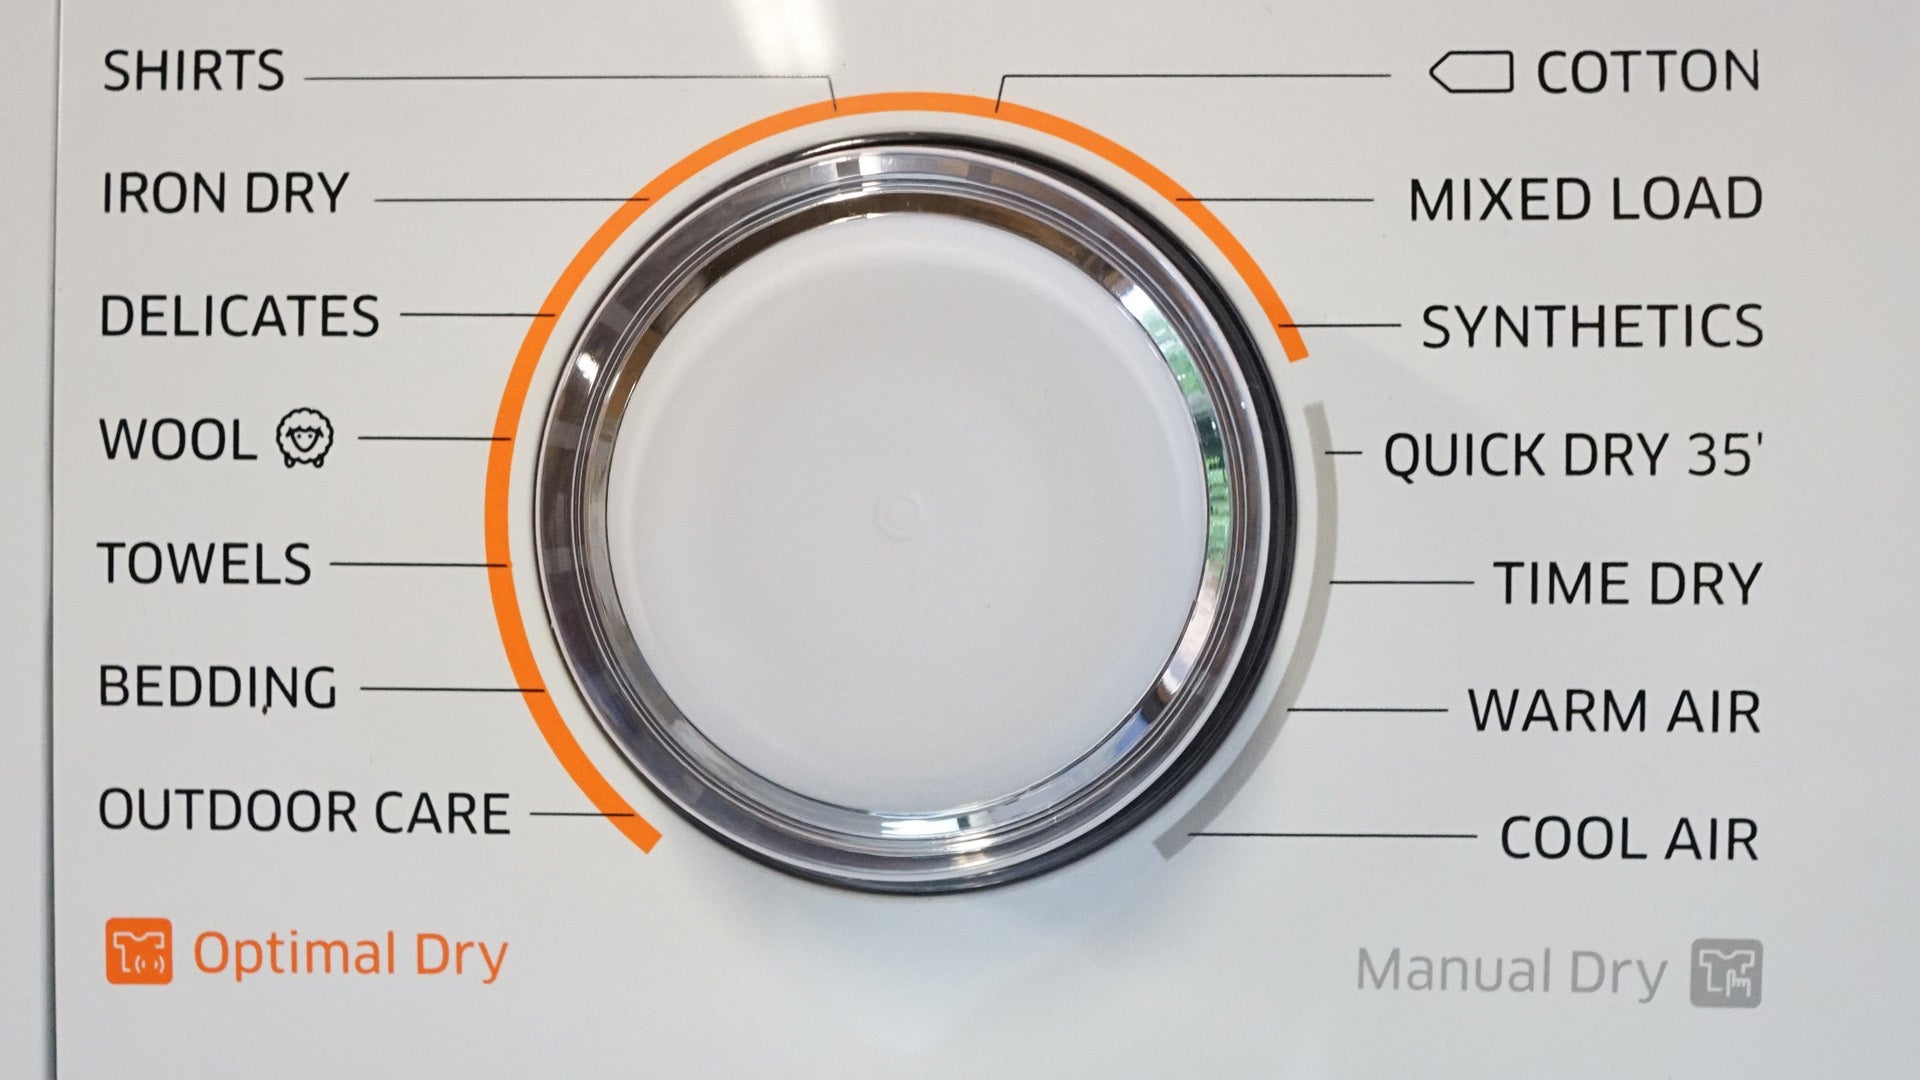 Samsung tumble dryer control panel with drying options.